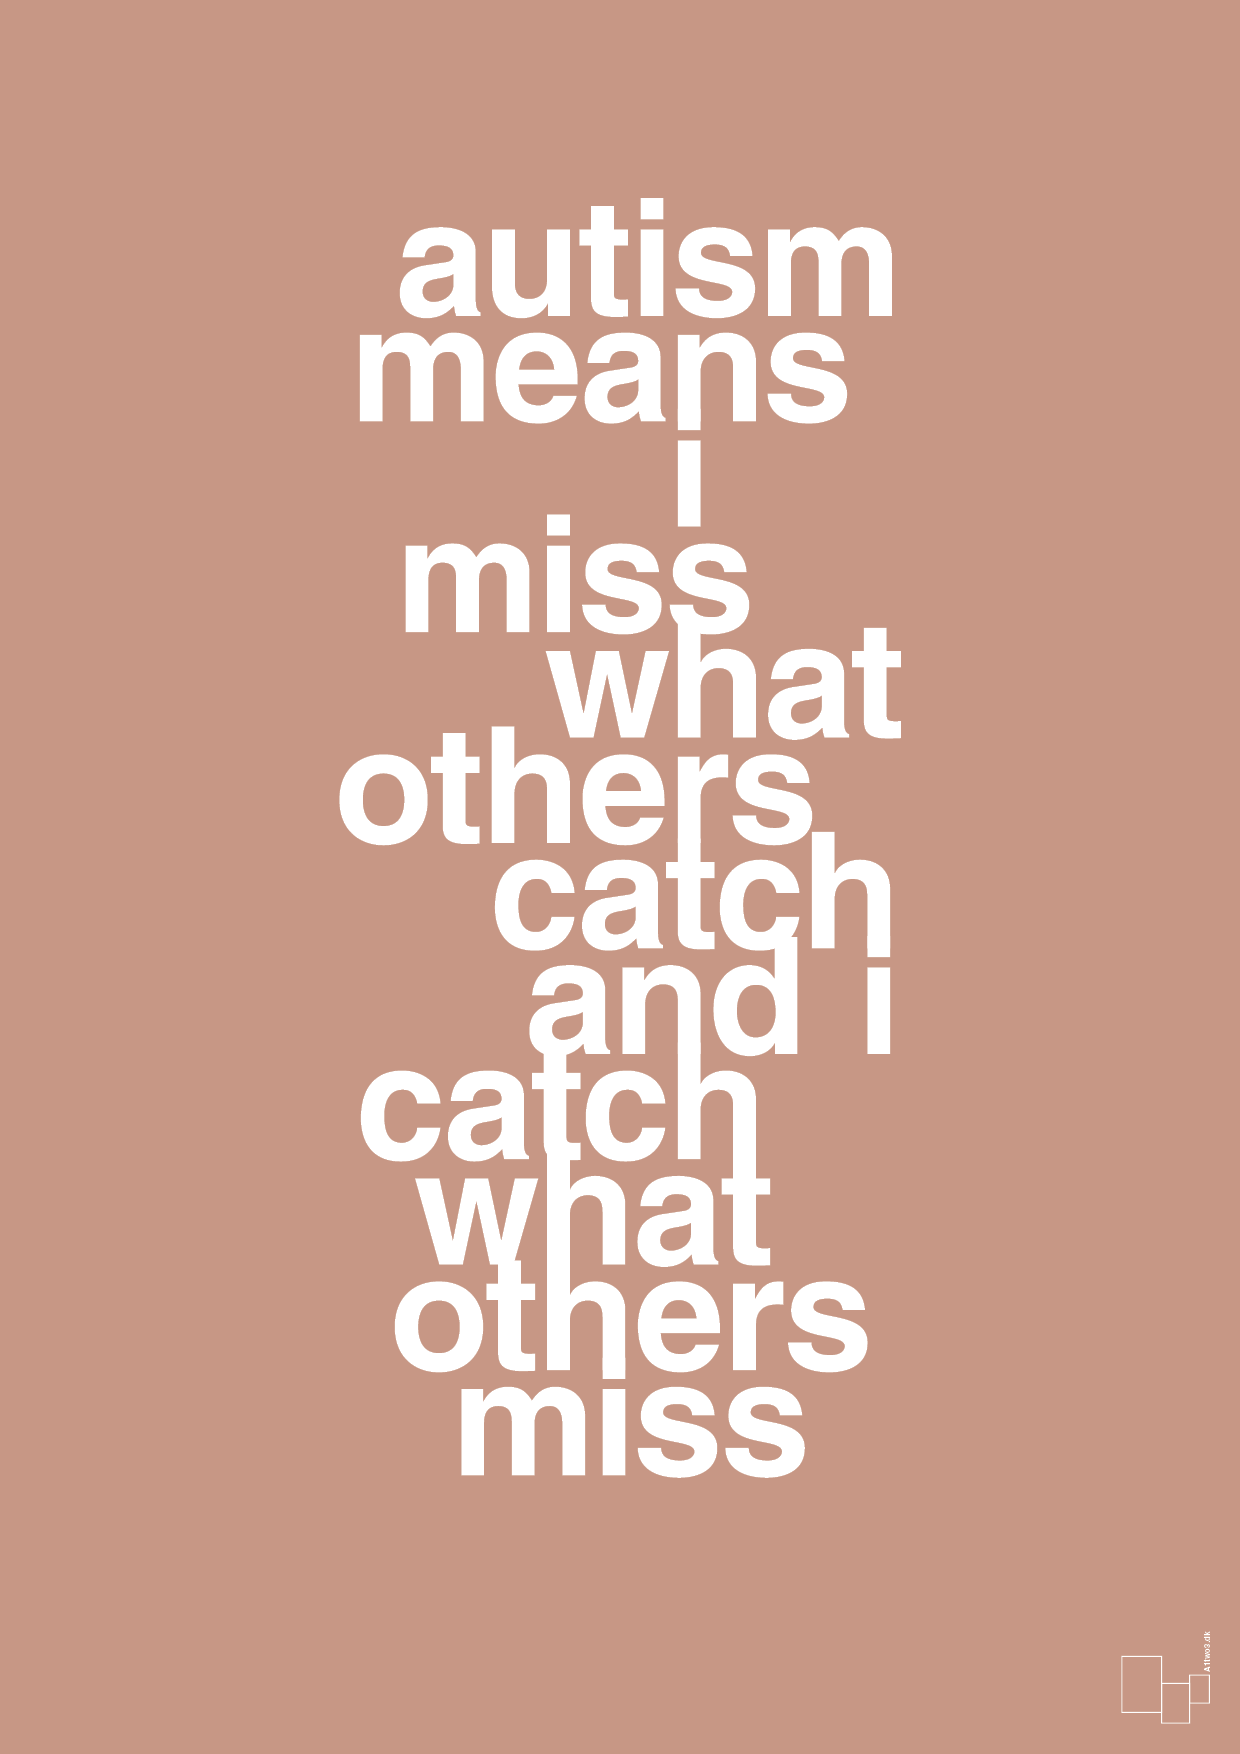 autism means i miss what others catch and i catch what others miss - Plakat med Samfund i Powder